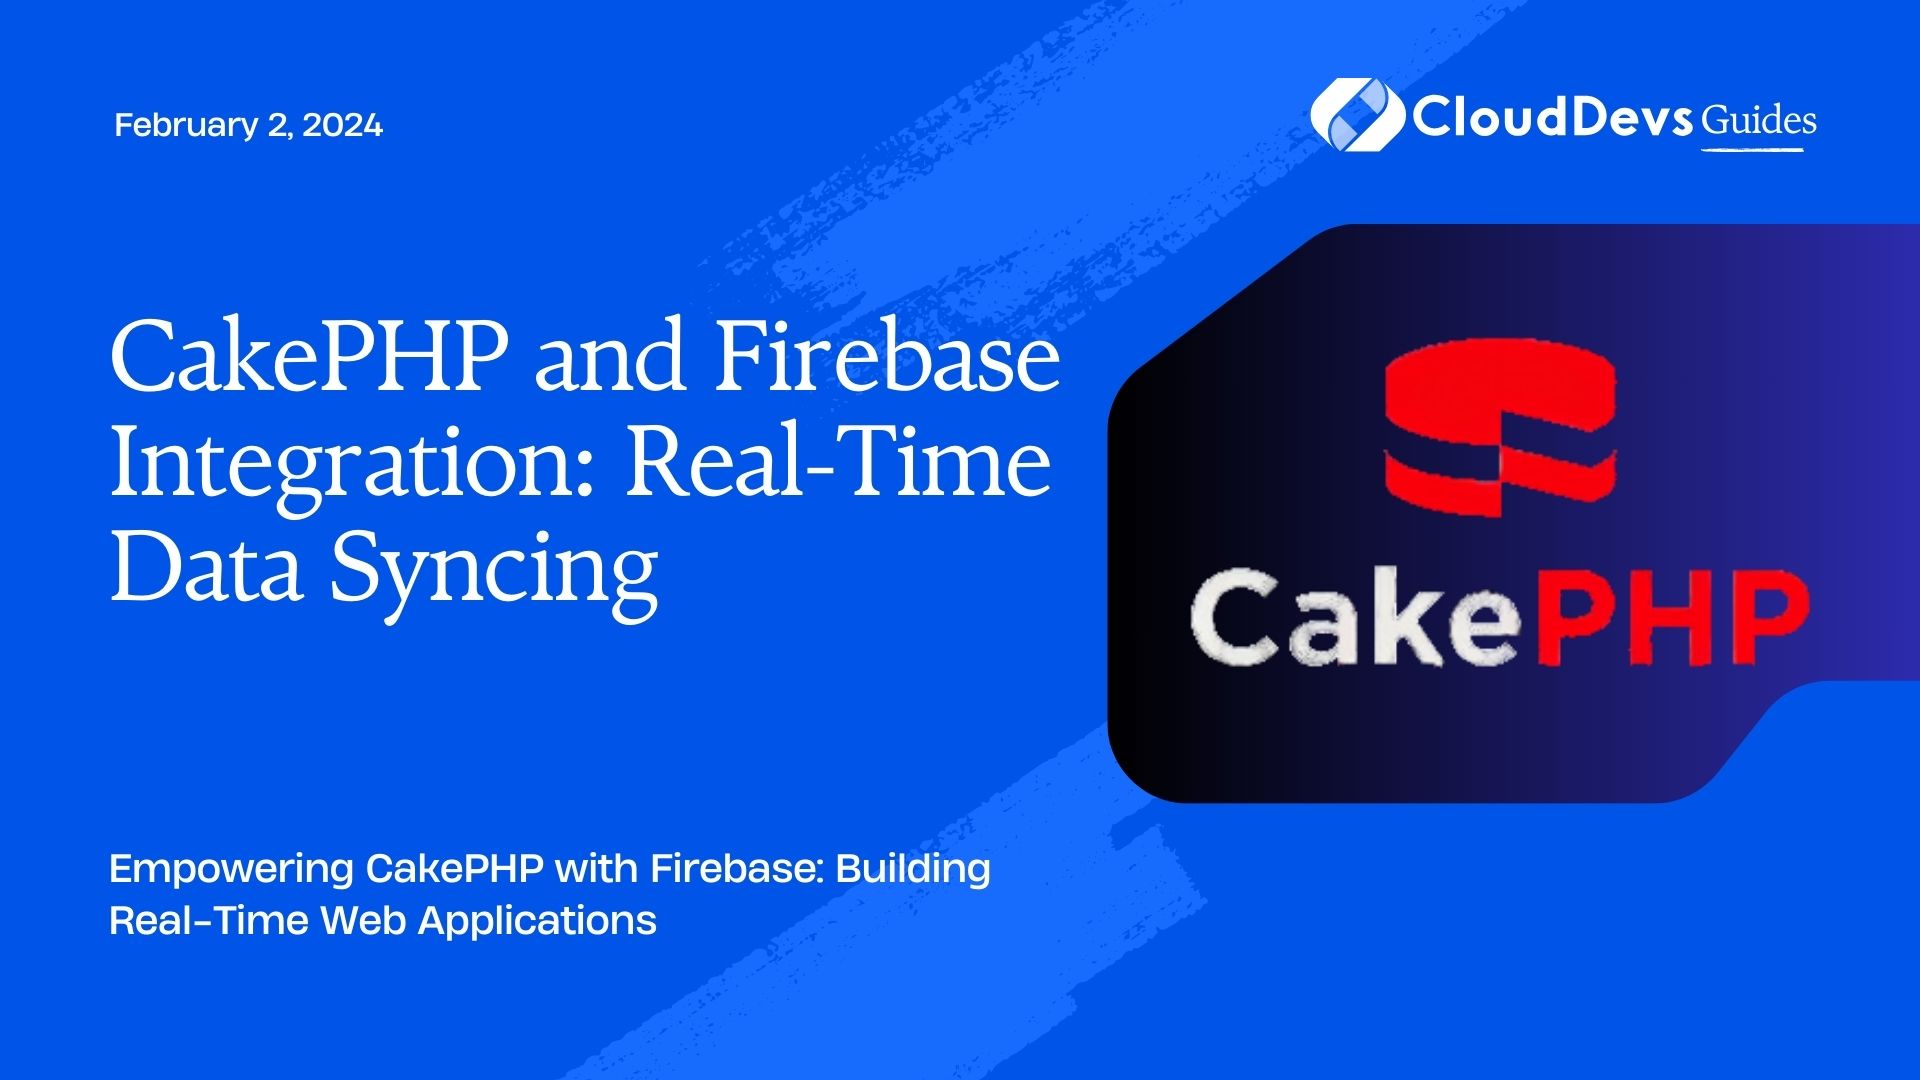 CakePHP and Firebase Integration: Real-Time Data Syncing